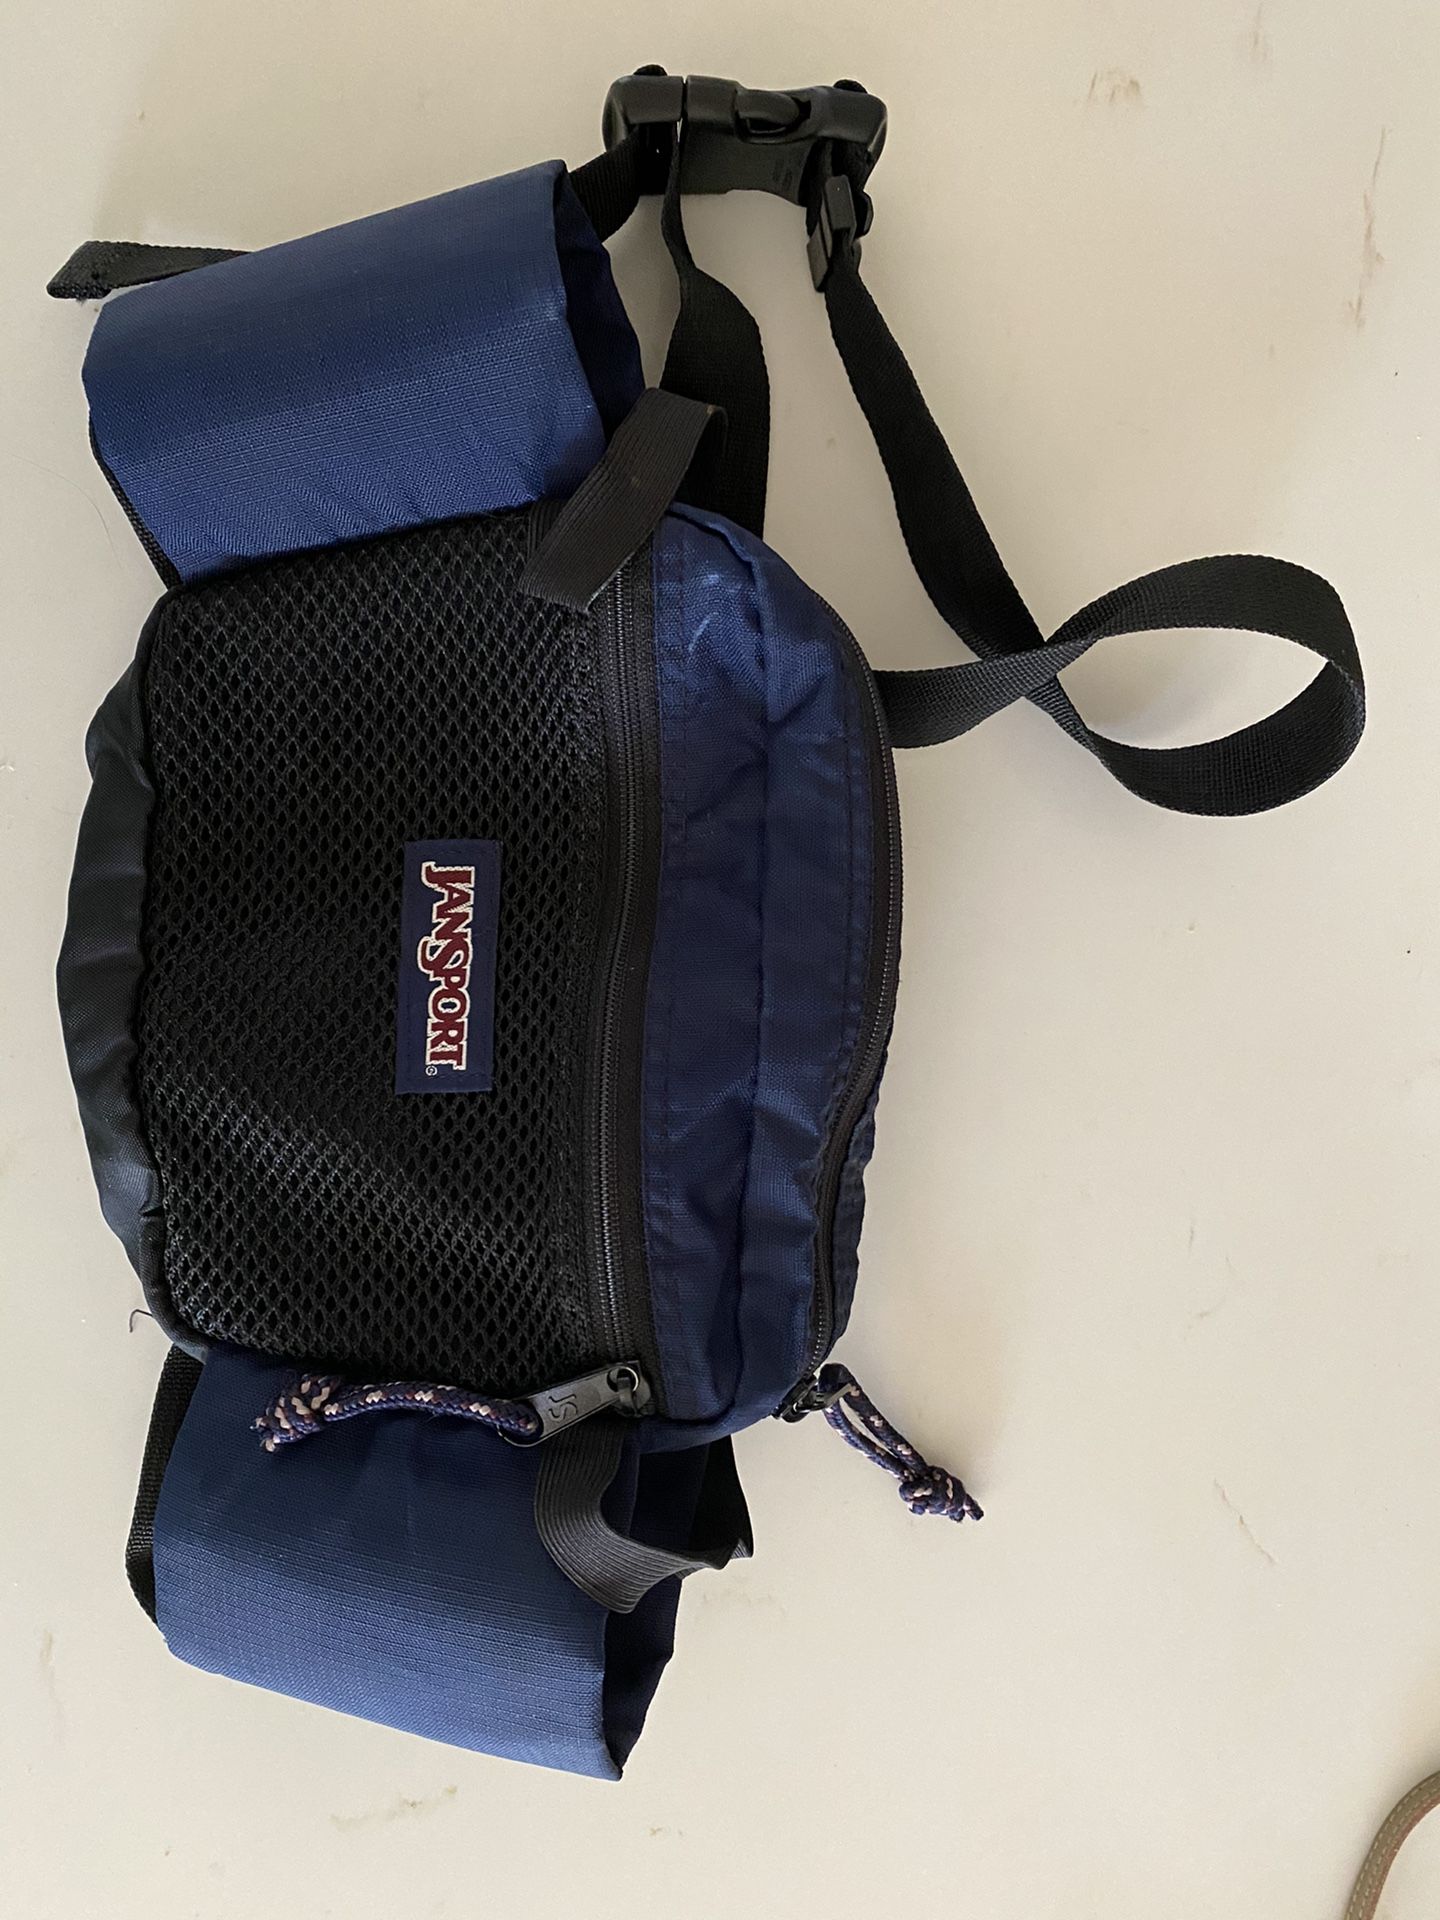 Jansport Fanny Pack. Holds 2 water bottles. Zippered compartments